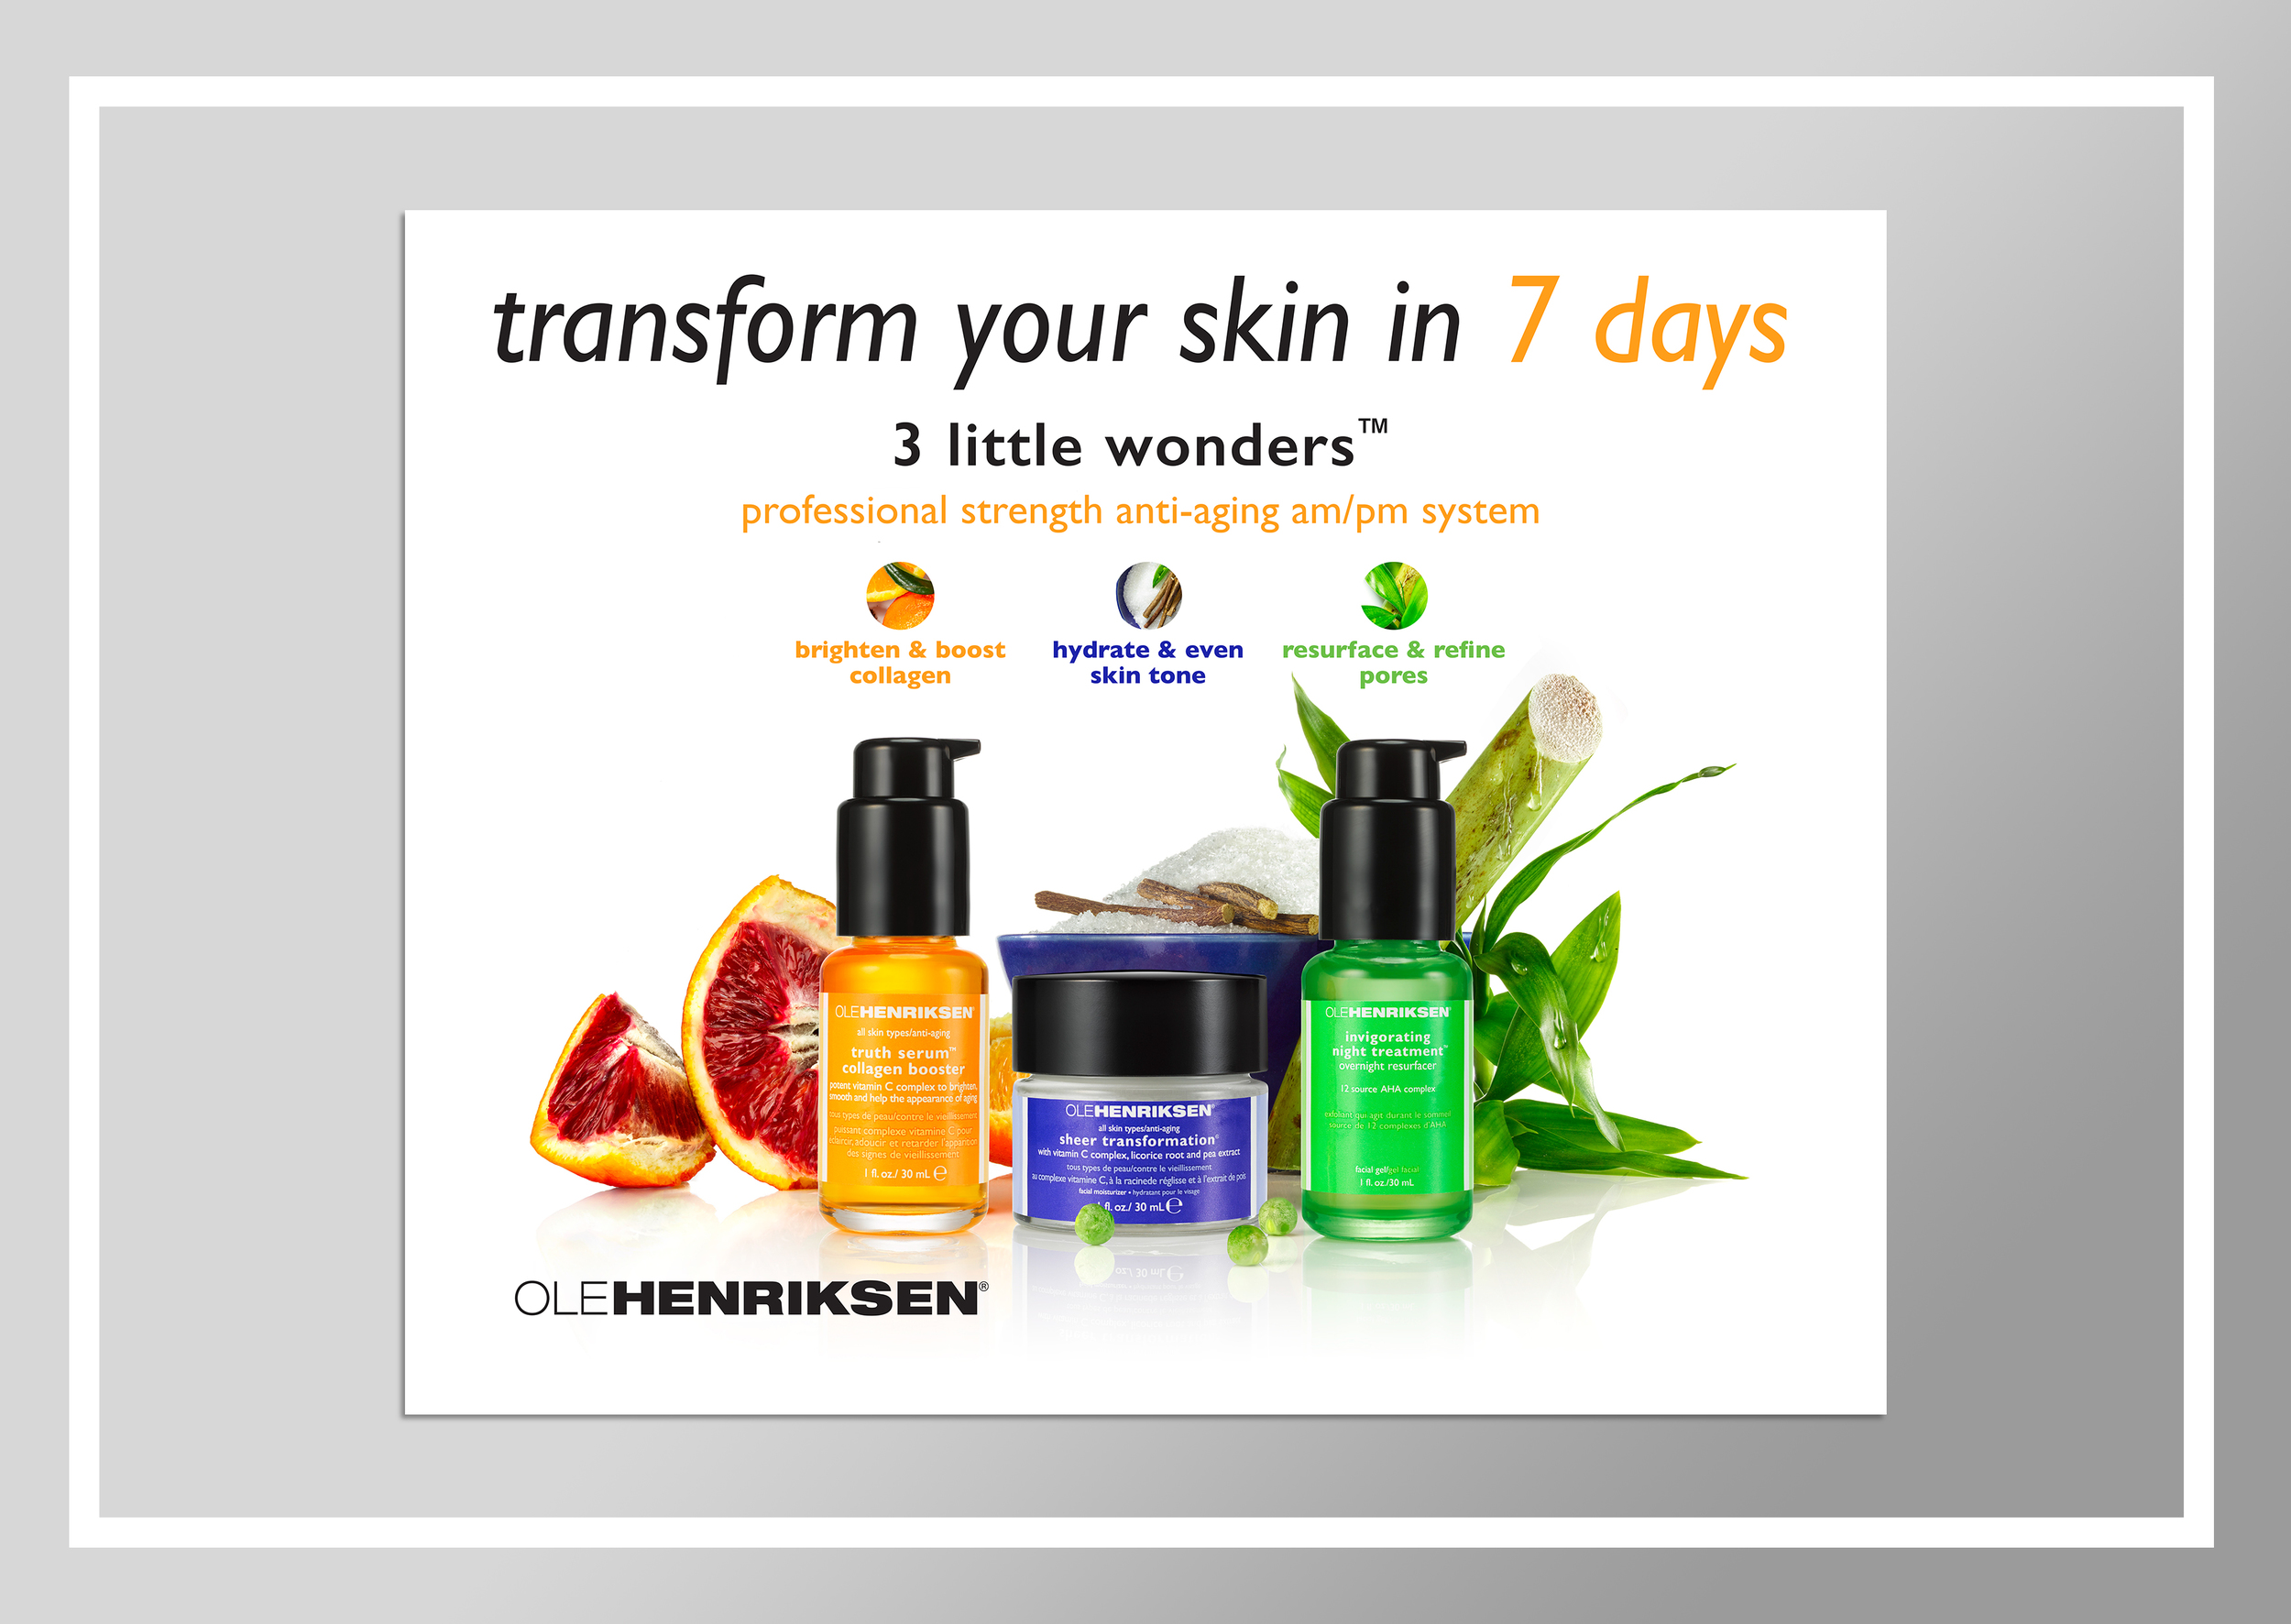  Handout for in-store event at Ole Henriksen 